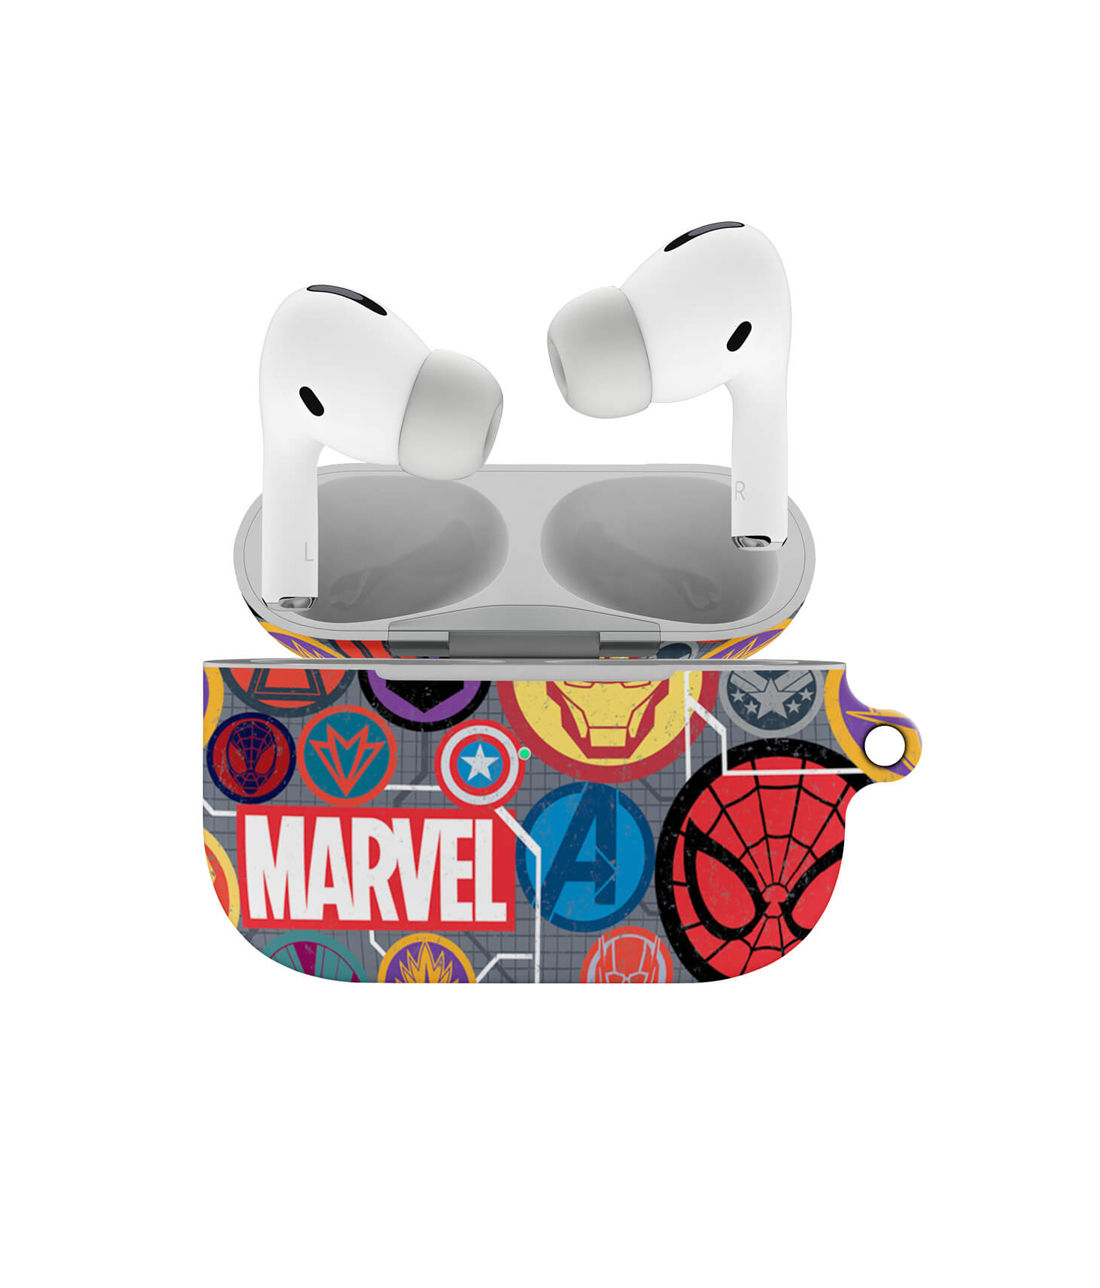 Buy Marvel Iconic Mashup - Hard Shell Airpod Pro Case Airpod Cases Online